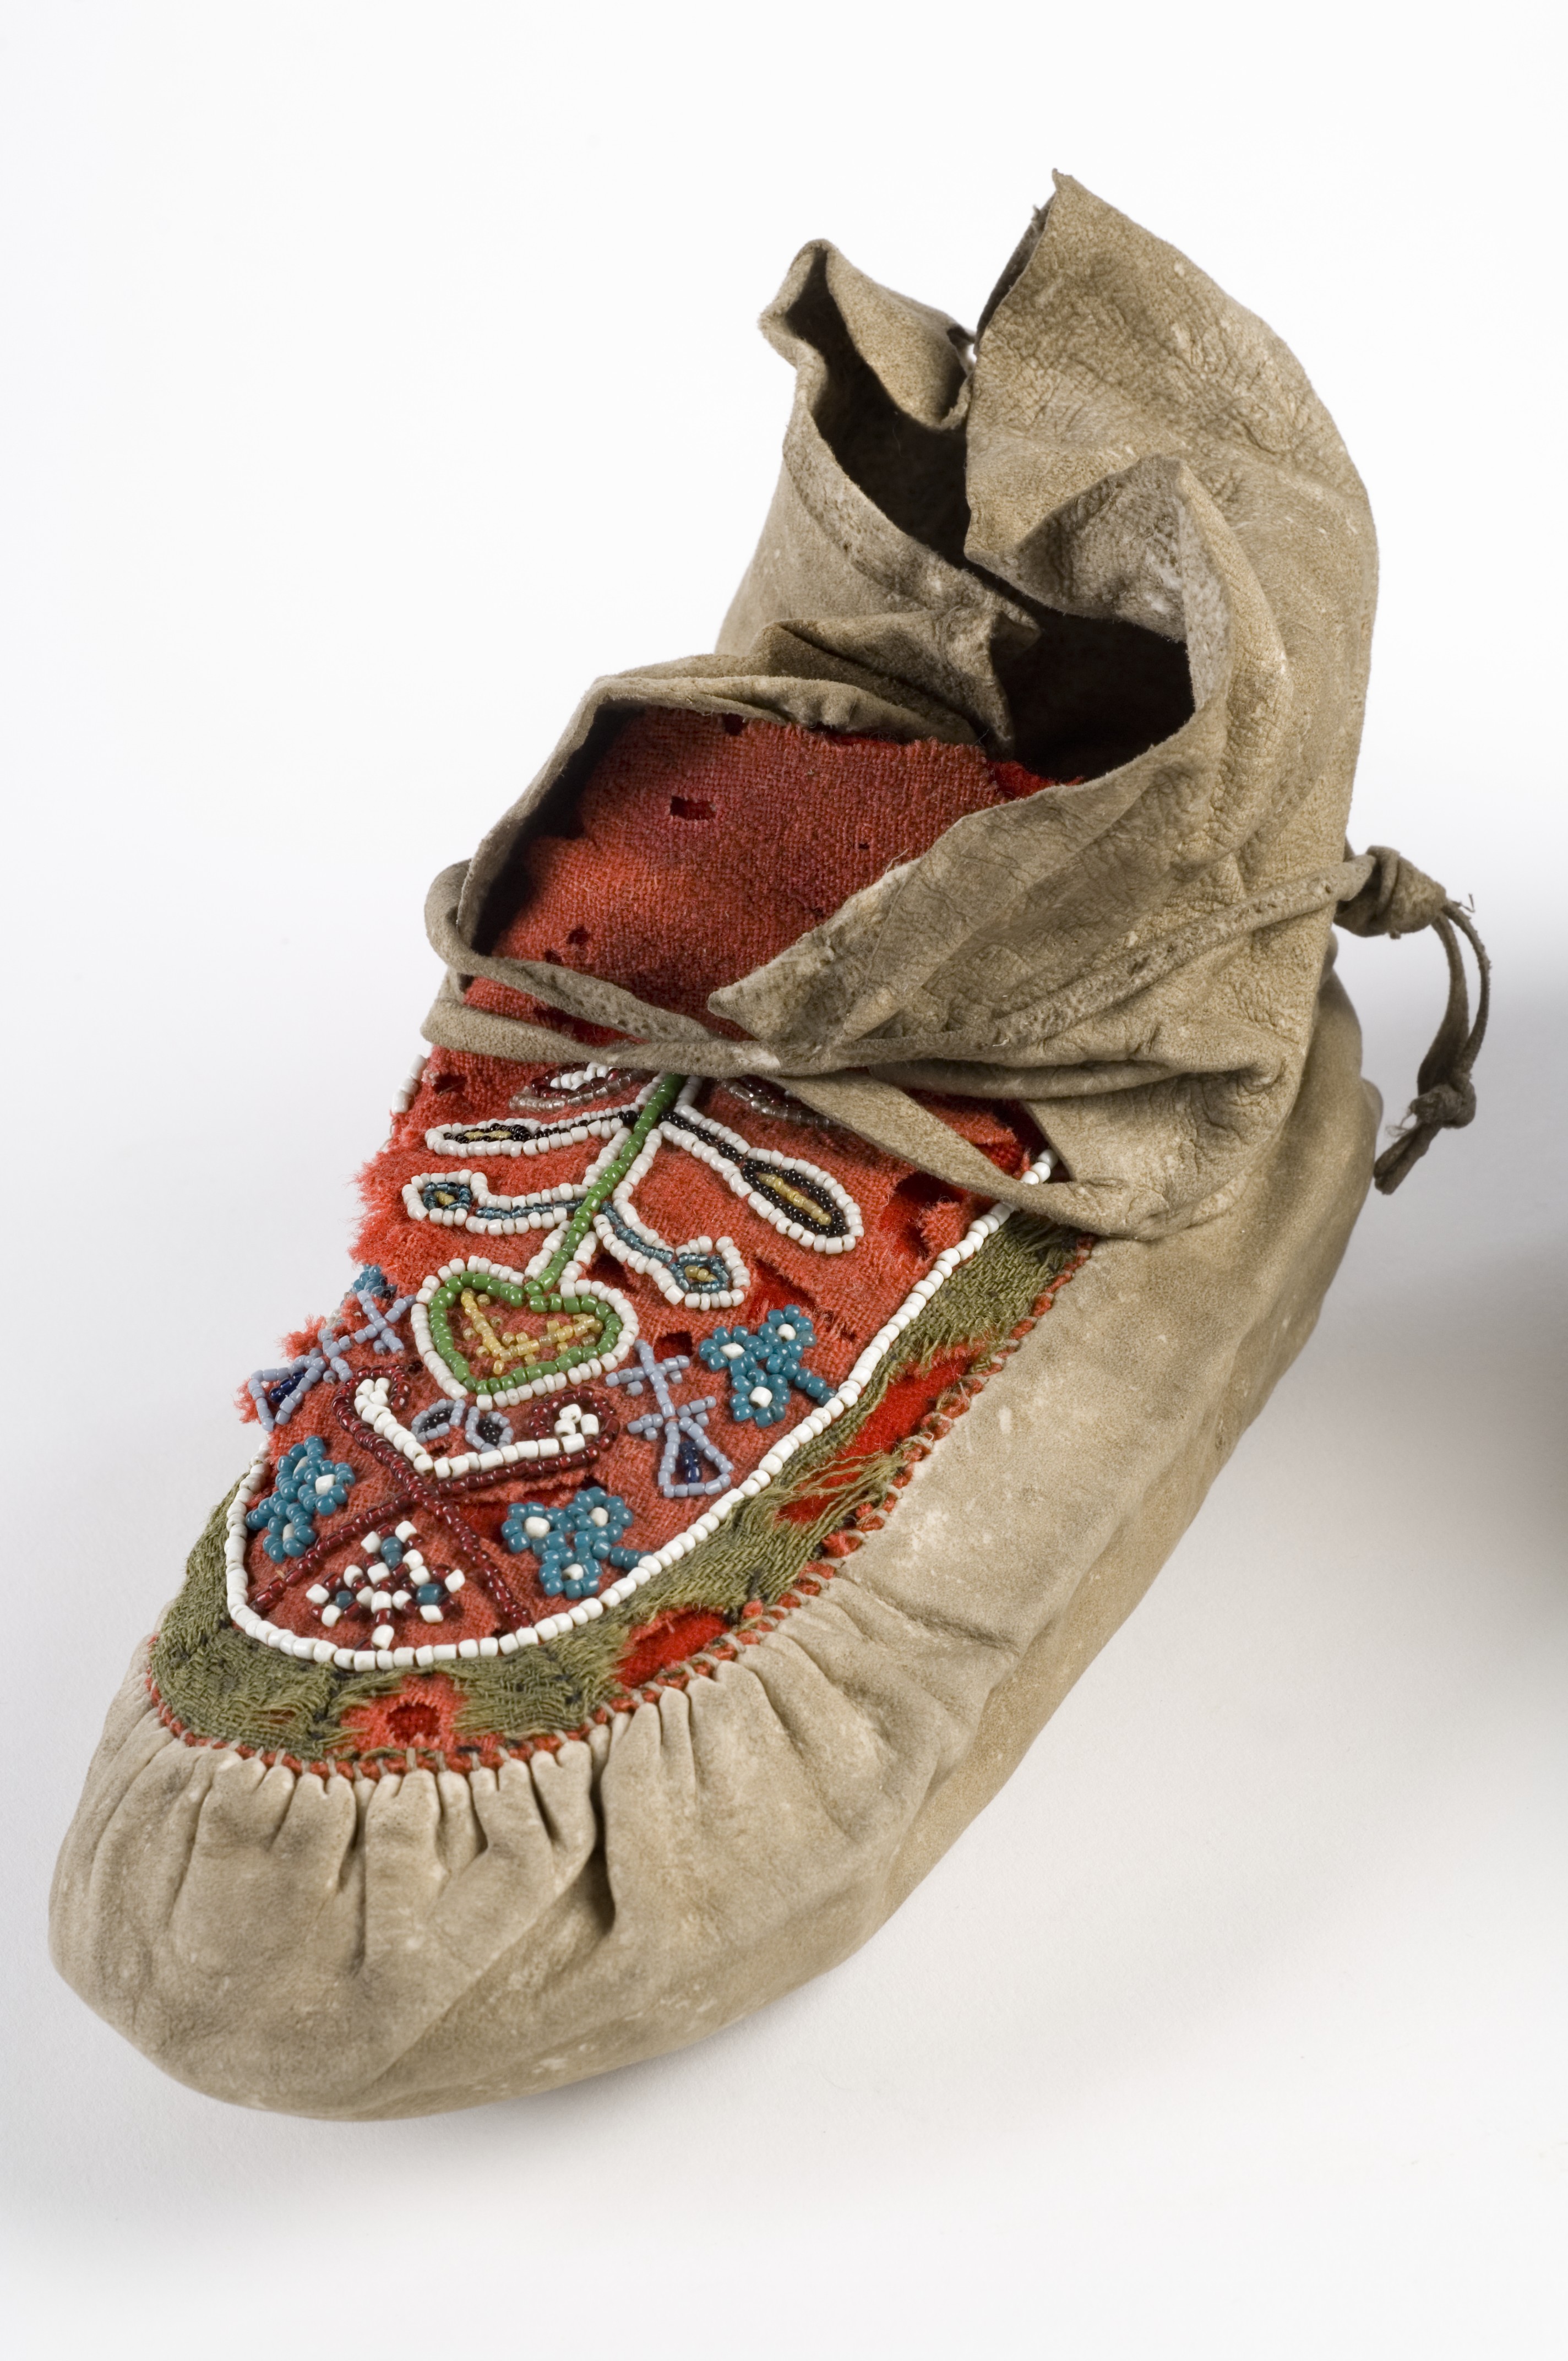 Florence Nightingale's Moccasins Wellcome L0043772